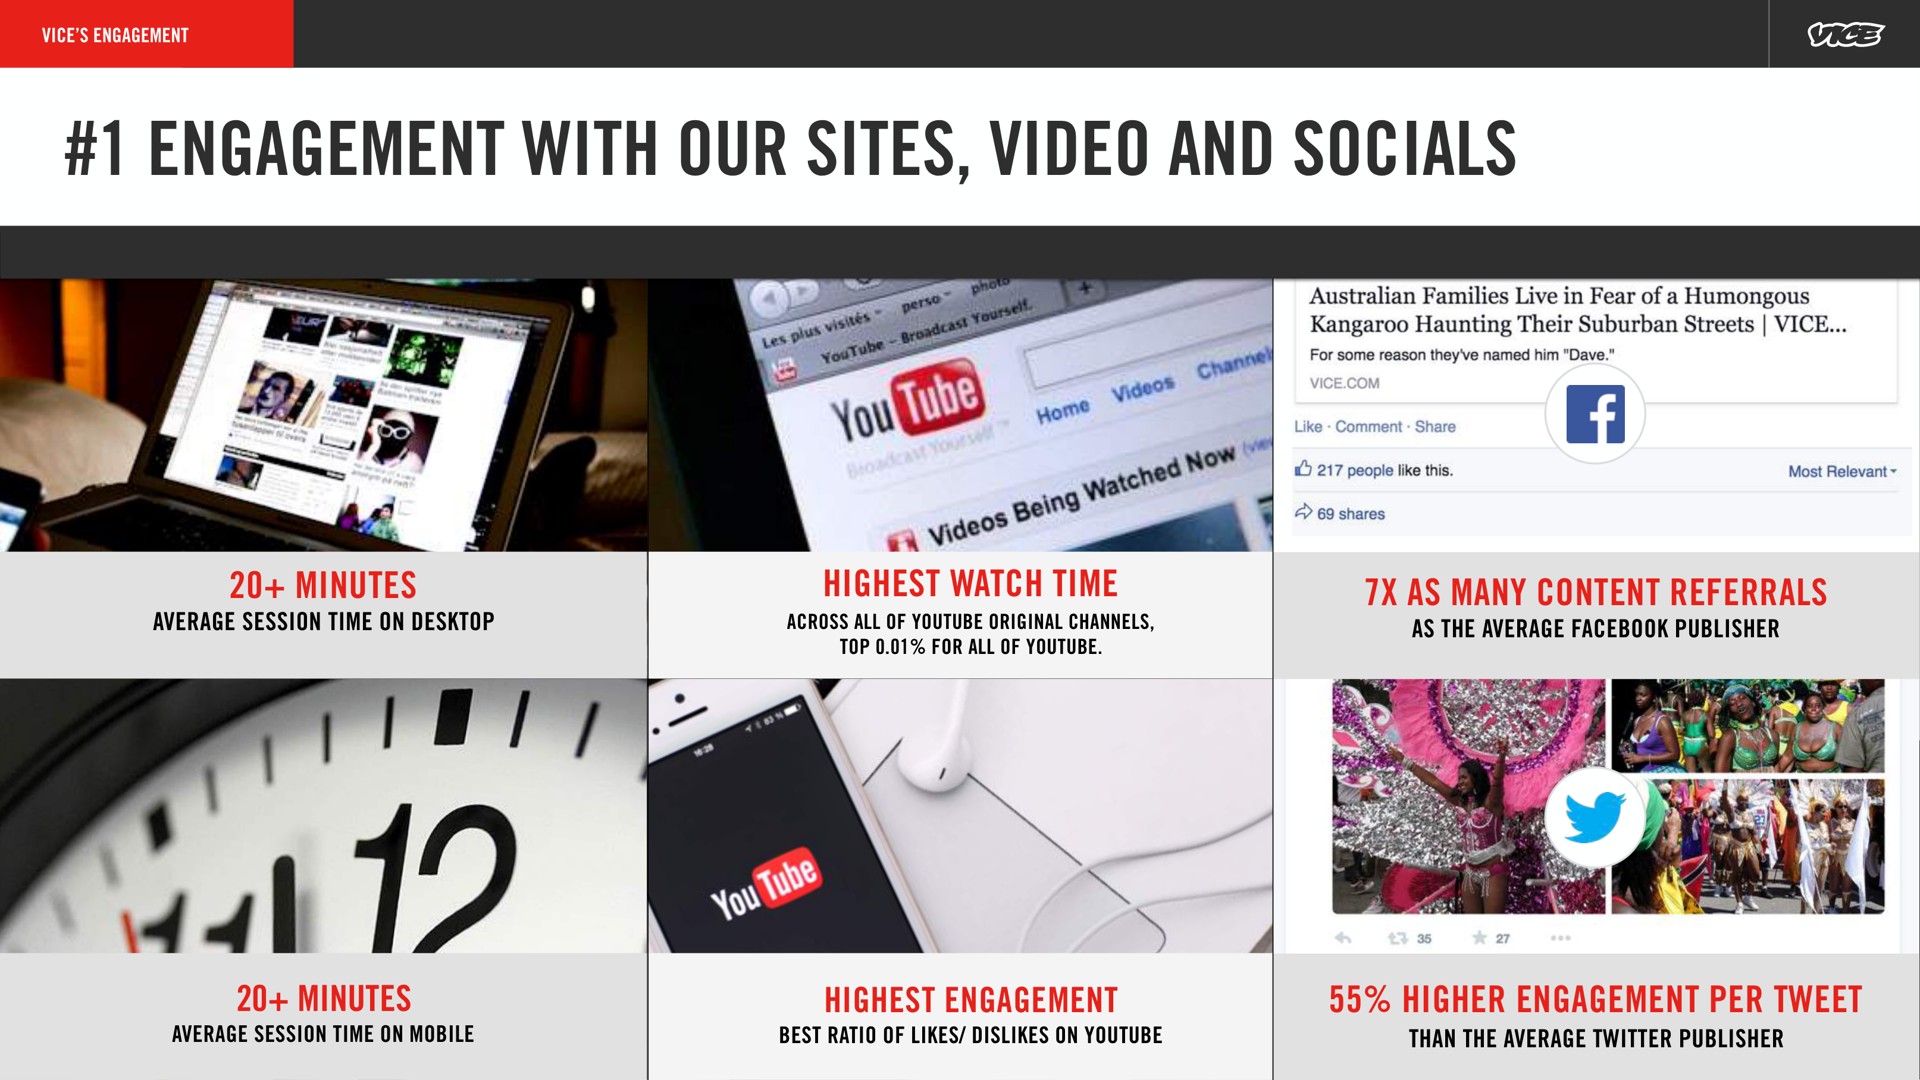 engagement with our sites video and socials minutes highest watch time as many content referrals minutes highest engagement higher engagement per tweet average session on average session on mobile best ratio of likes dislikes on the average publisher than the average twitter publisher | Vice Media Group